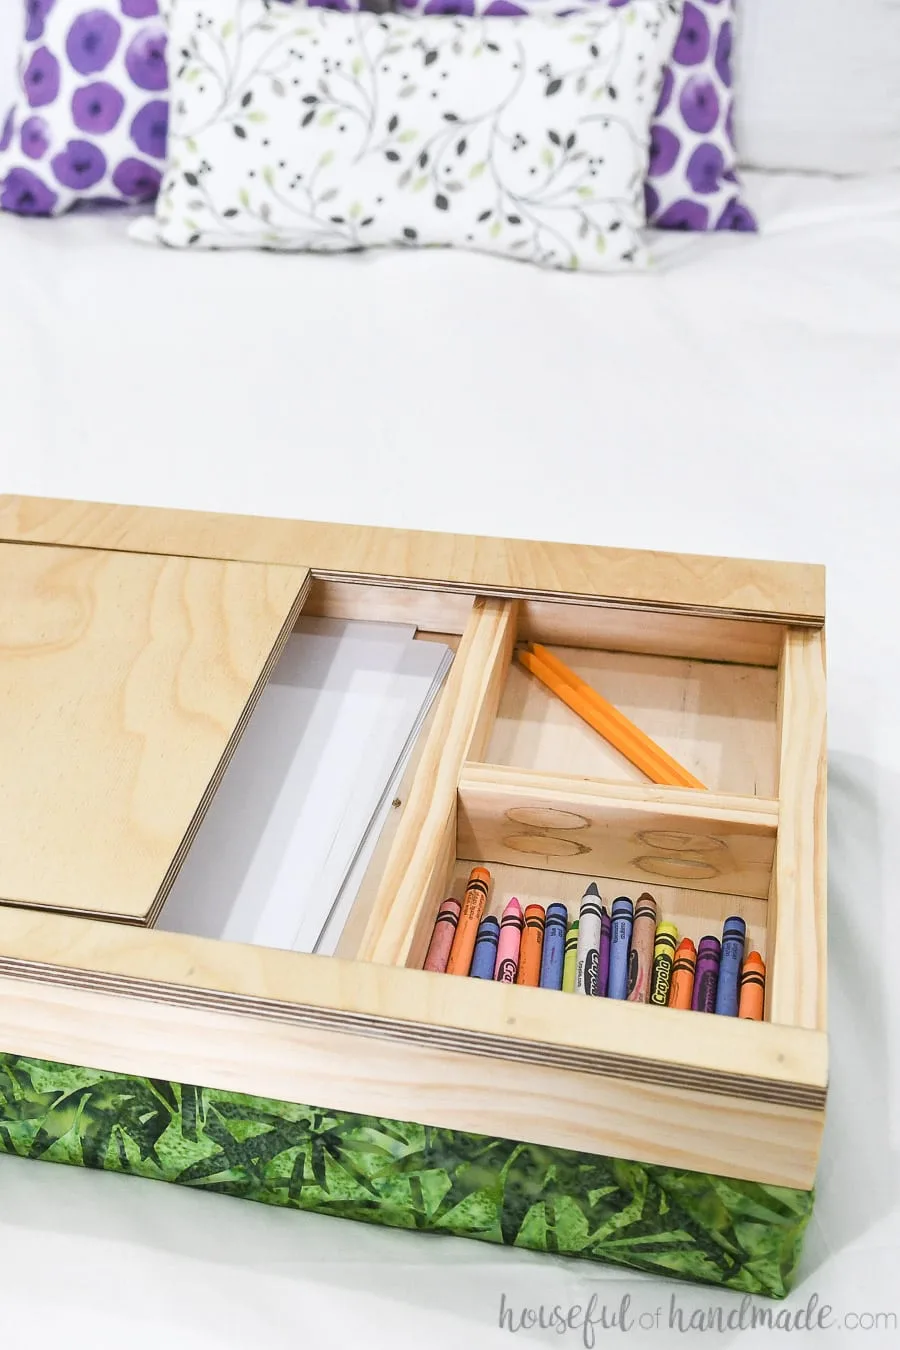 Lap desk with top slide off showing compartments for art supplies underneath. 